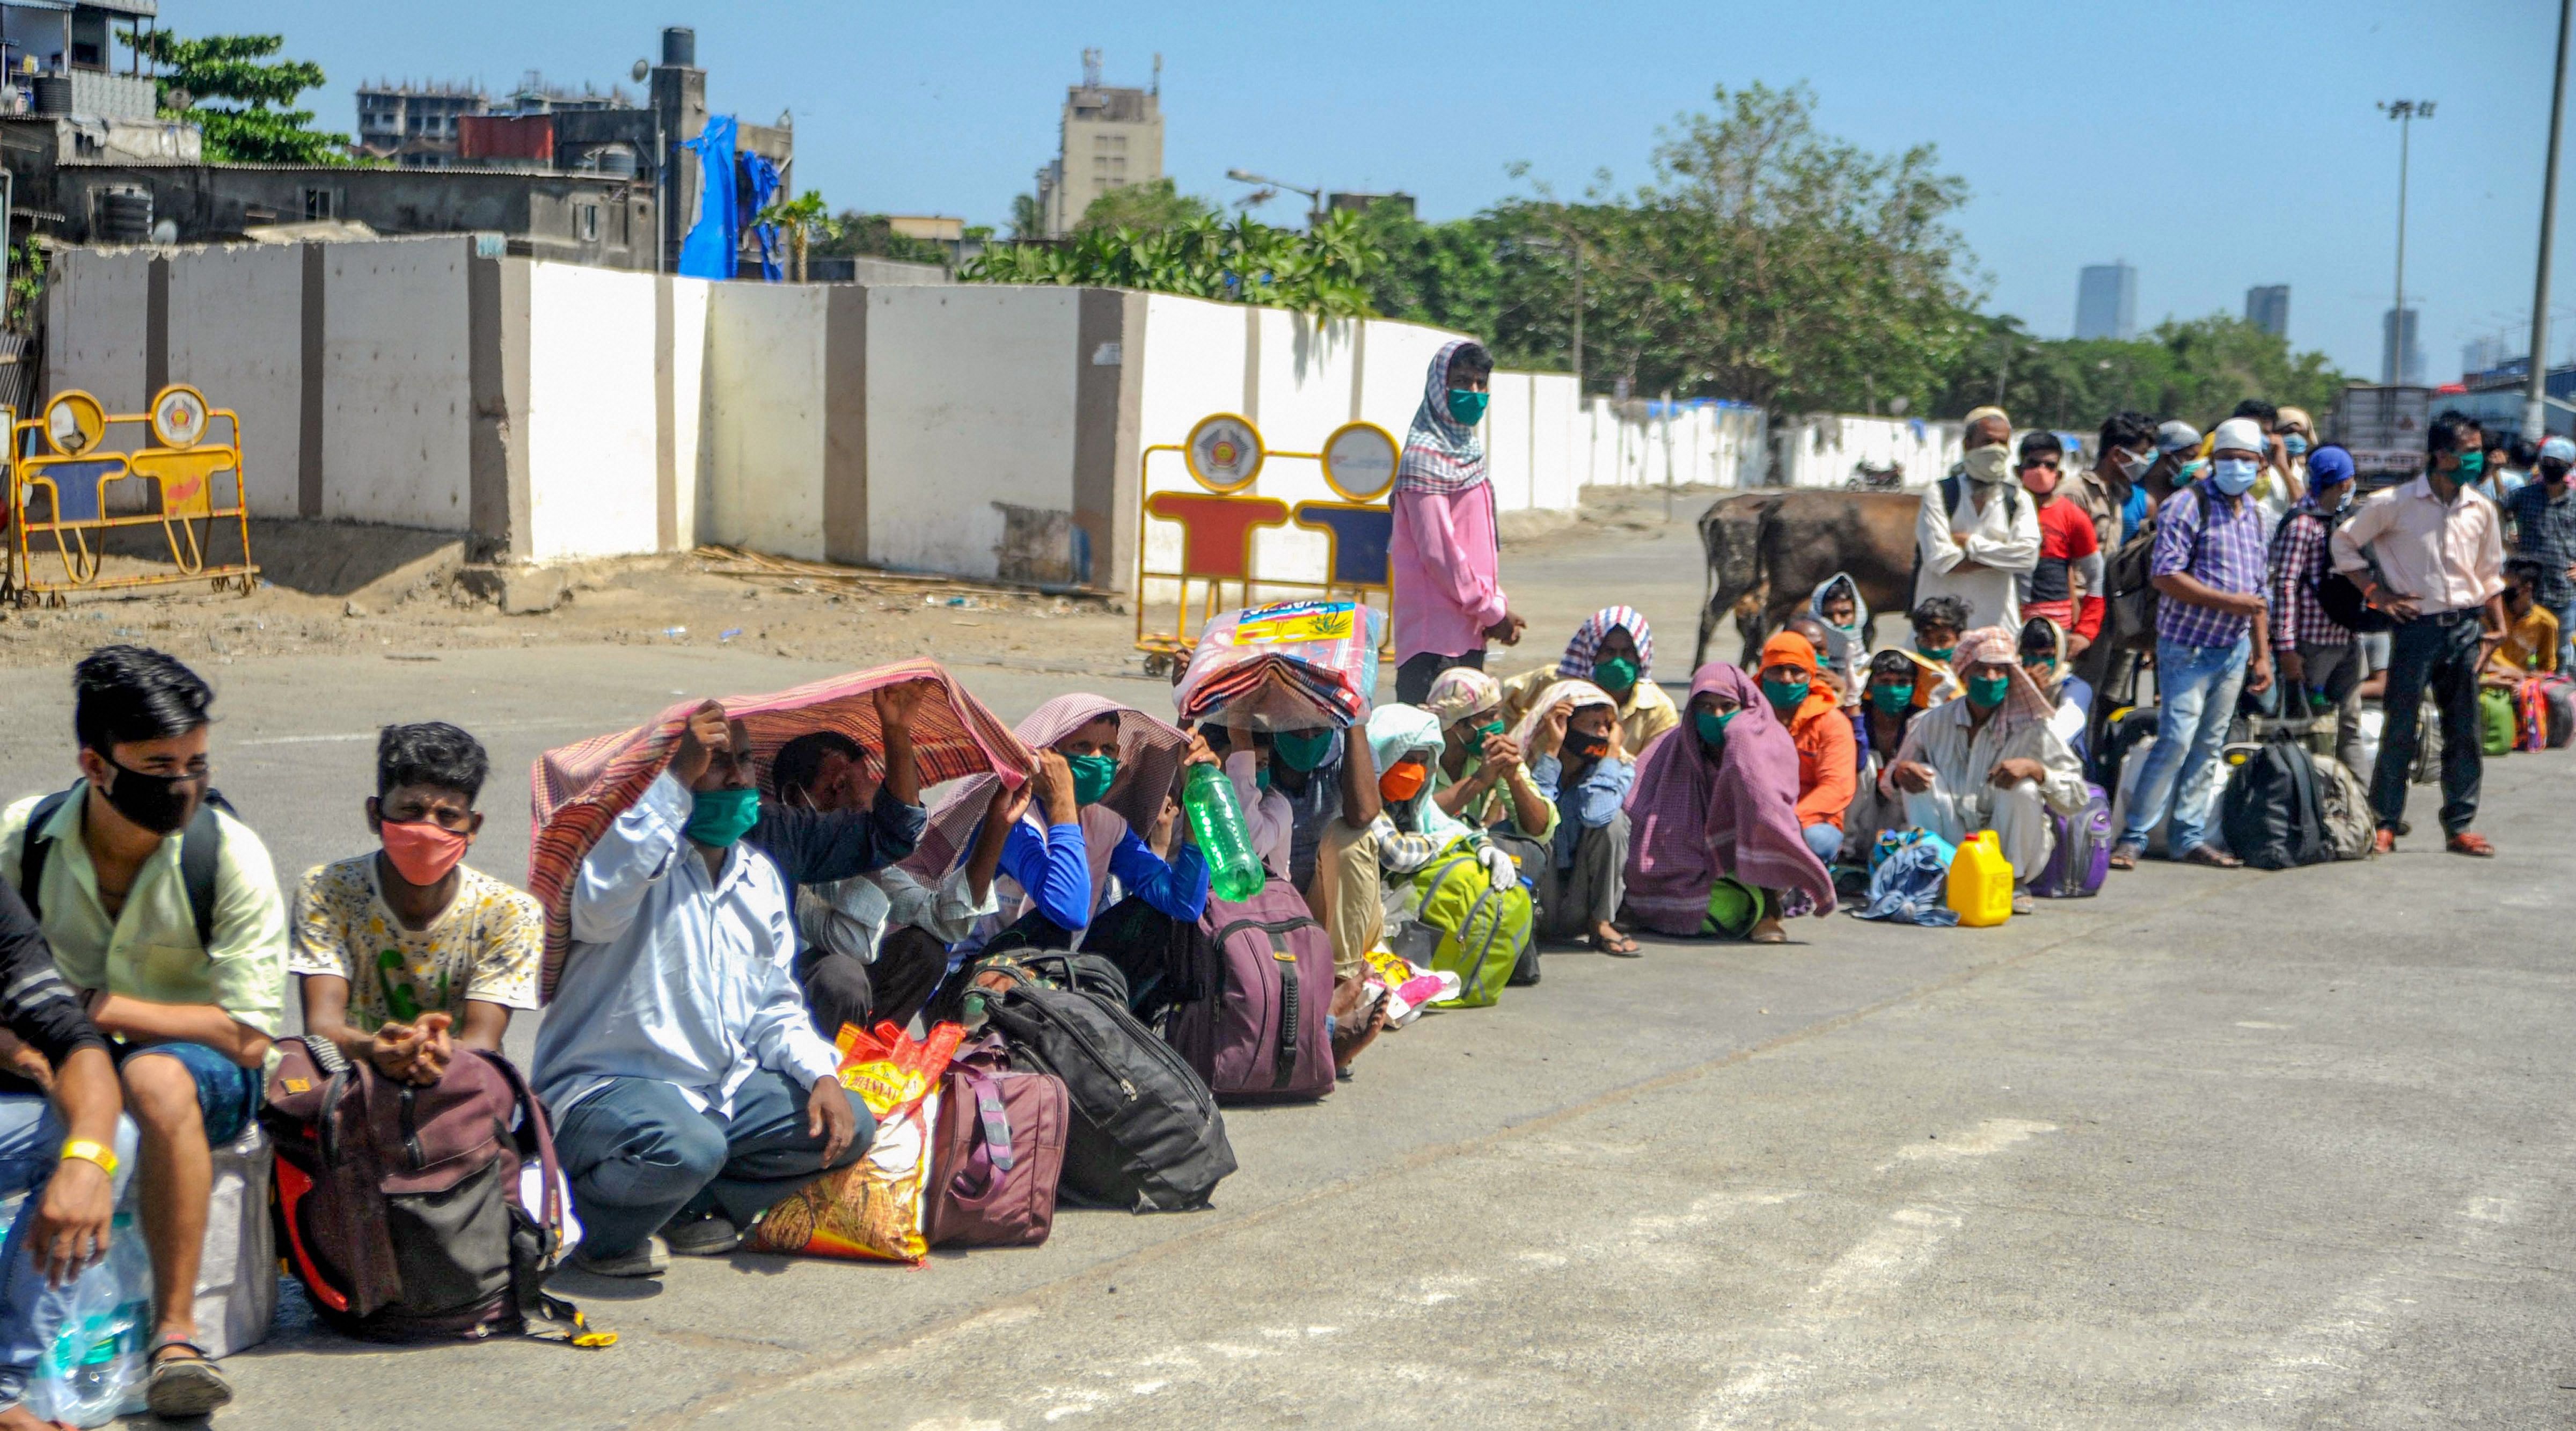 Migrants wait outside Bandra station as they wait to board a train to their native places, during the ongoing nationwide lockdown to curb the spread of coronavirus. (PTI Photo)